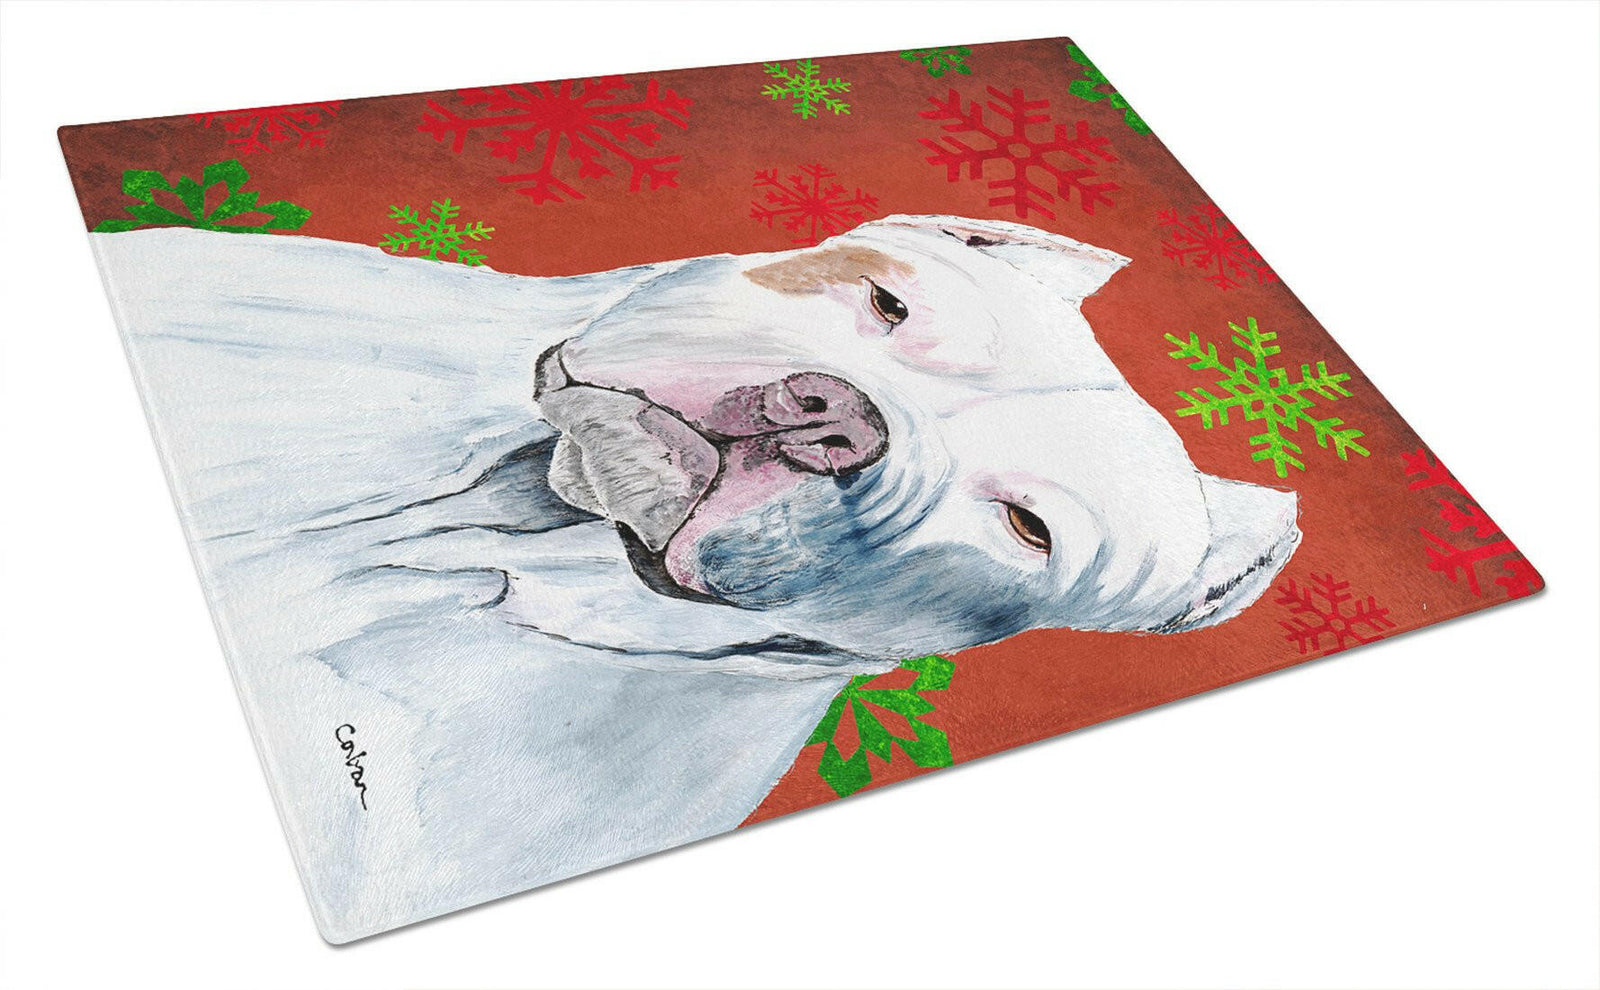 Pit Bull Red and Green Snowflakes Holiday Christmas Glass Cutting Board Large by Caroline's Treasures